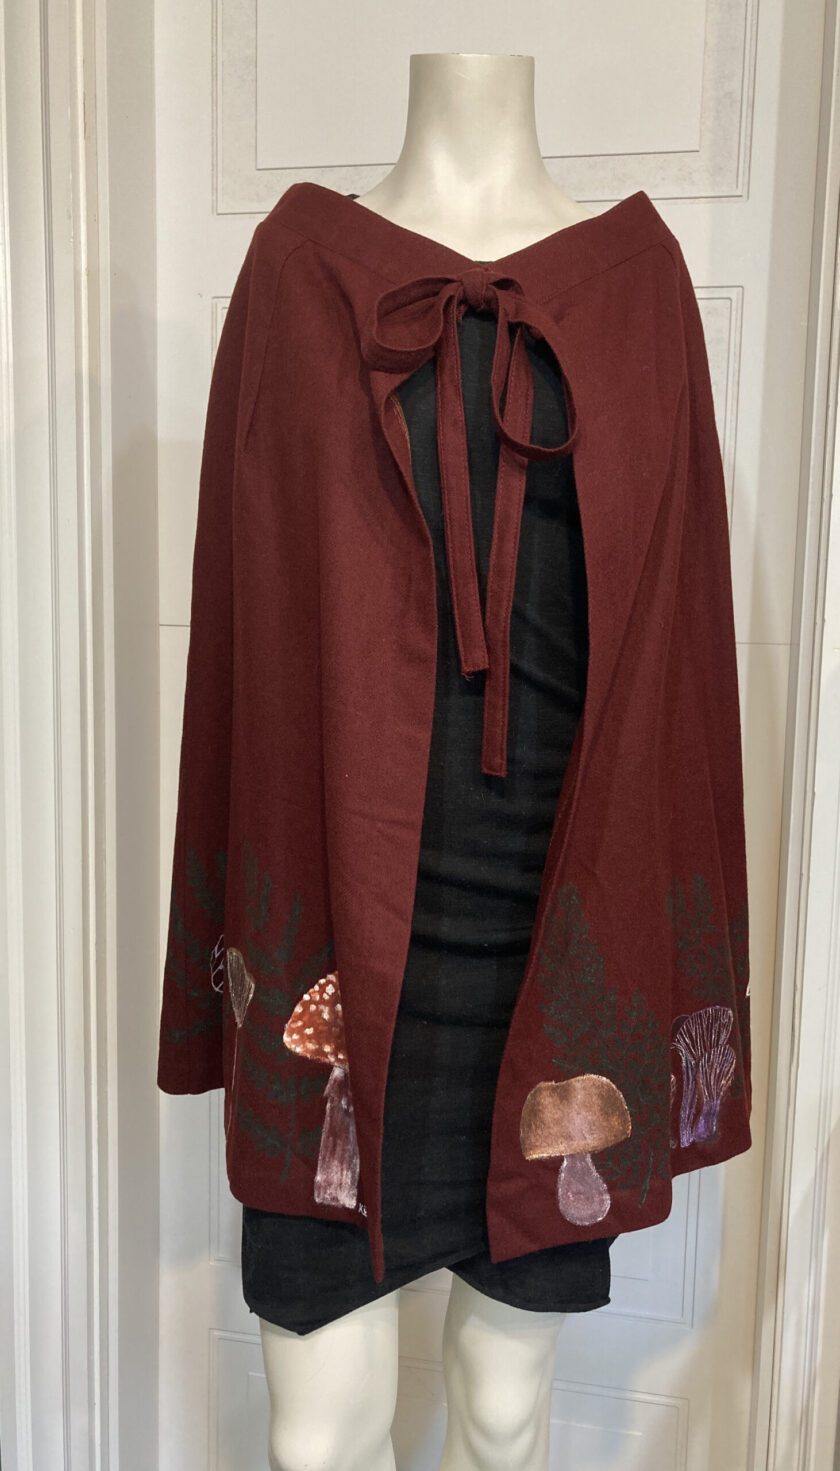 A mannequin mannequin wearing a burgundy cape with mushrooms on it.